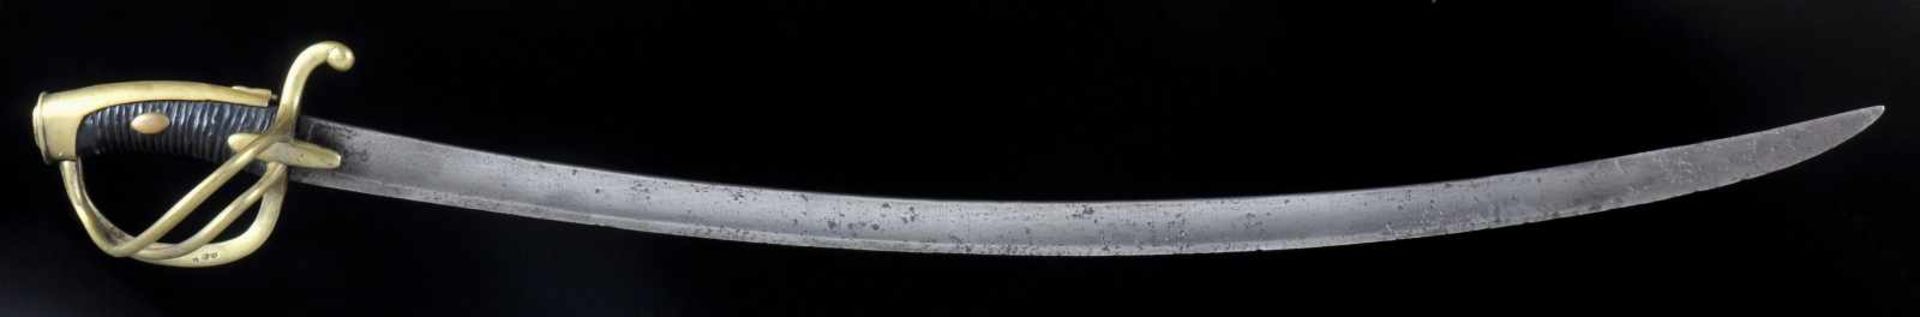 A FRENCH AN XI LIGHT CAVALRY TROOPER'S SWORD, NAPOLEON ARMY. FRANCE, EARLY 19TH CENTURY, EMPIRE - Bild 13 aus 17